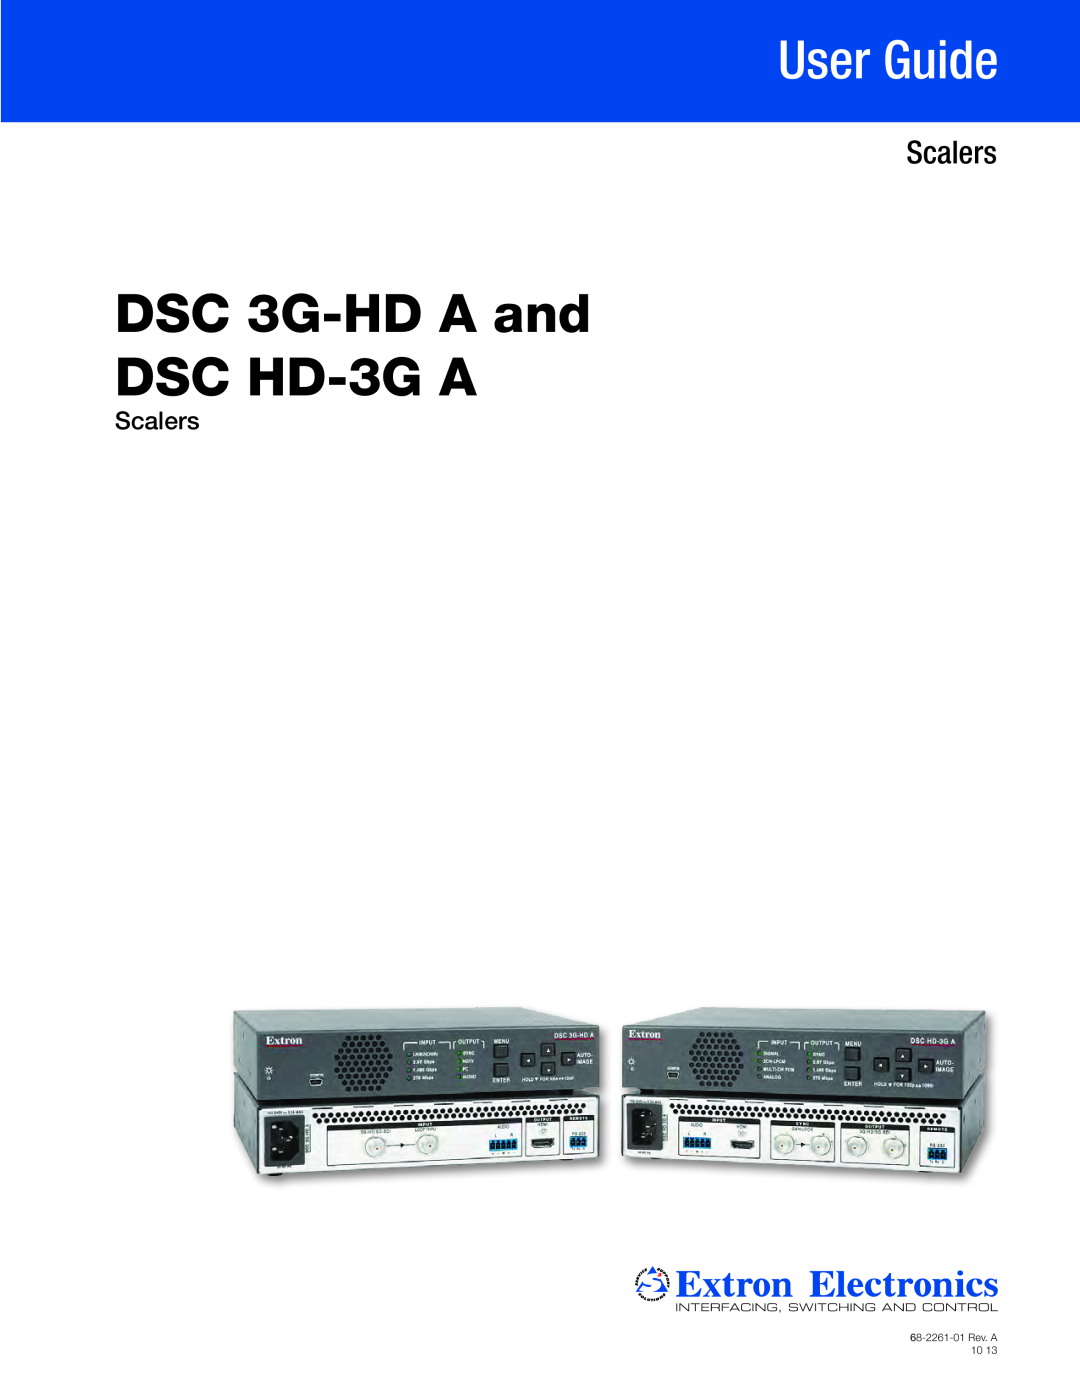 Extron electronic setup guide DSC 3G-HD A Scaler Setup Guide, Installation, Rear Panel Features, Rack Mounting 